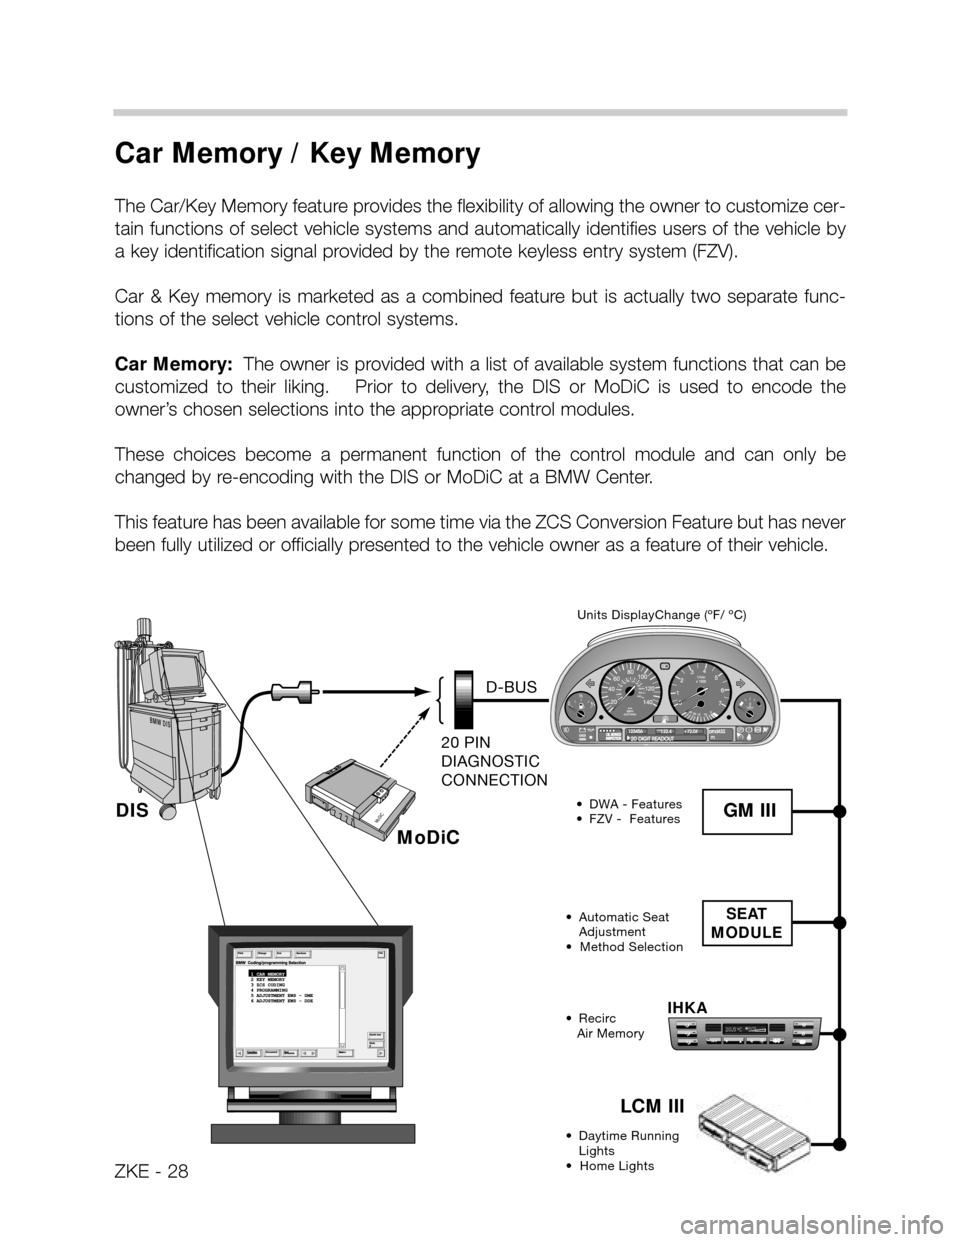 BMW X5 2006 E53 Central Body Electronics Workshop Manual Car Memory / Key Memory 
The Car/Key Memory feature provides the flexibility of allowing the owner to customize cer-
tain functions of select vehicle systems and automatically identifies users of the 